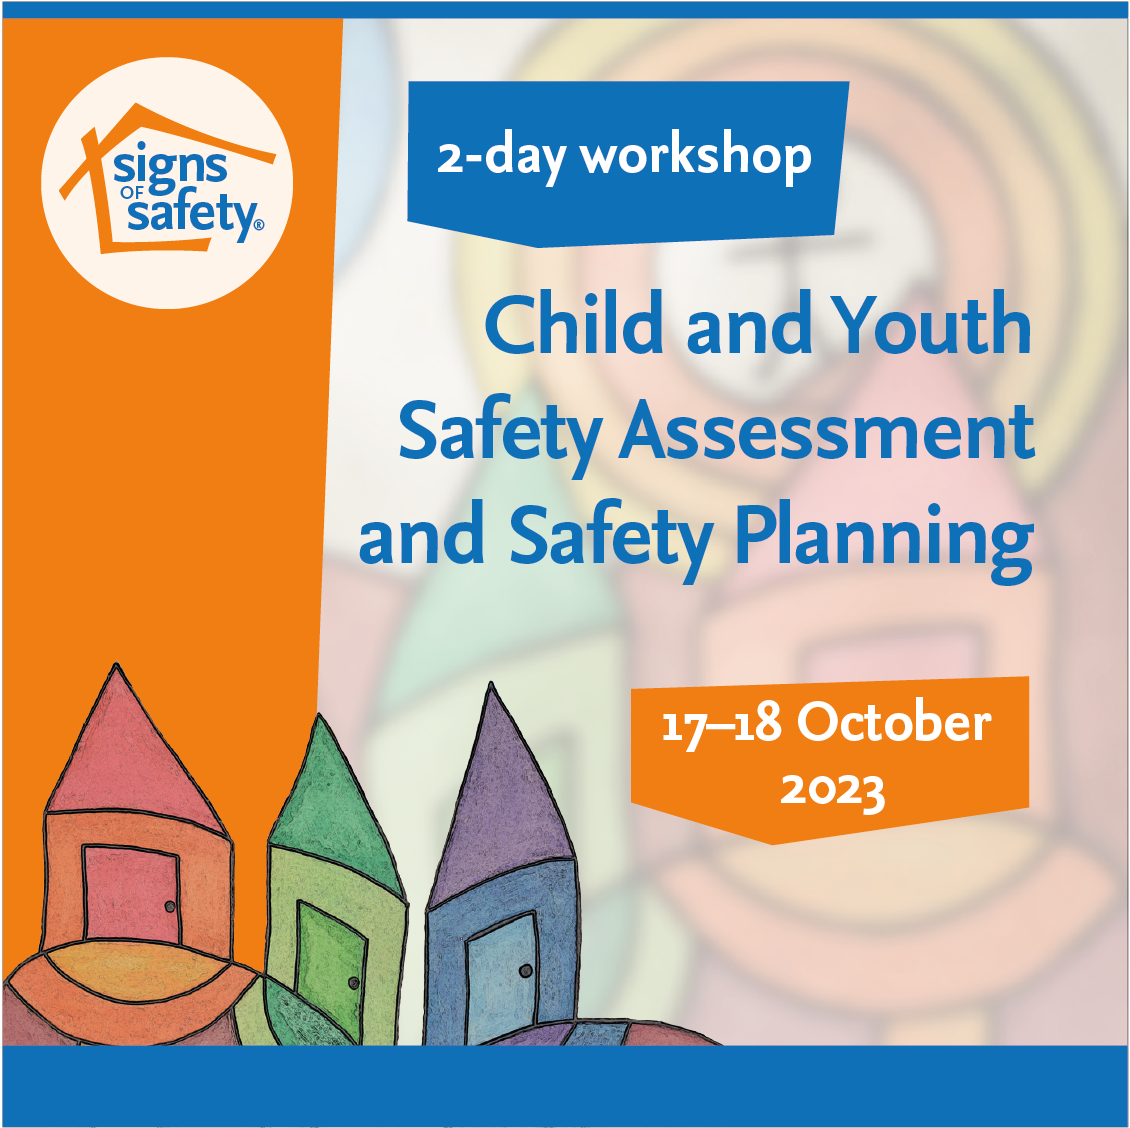 Child and Youth Safety Assessment and Safety Planning